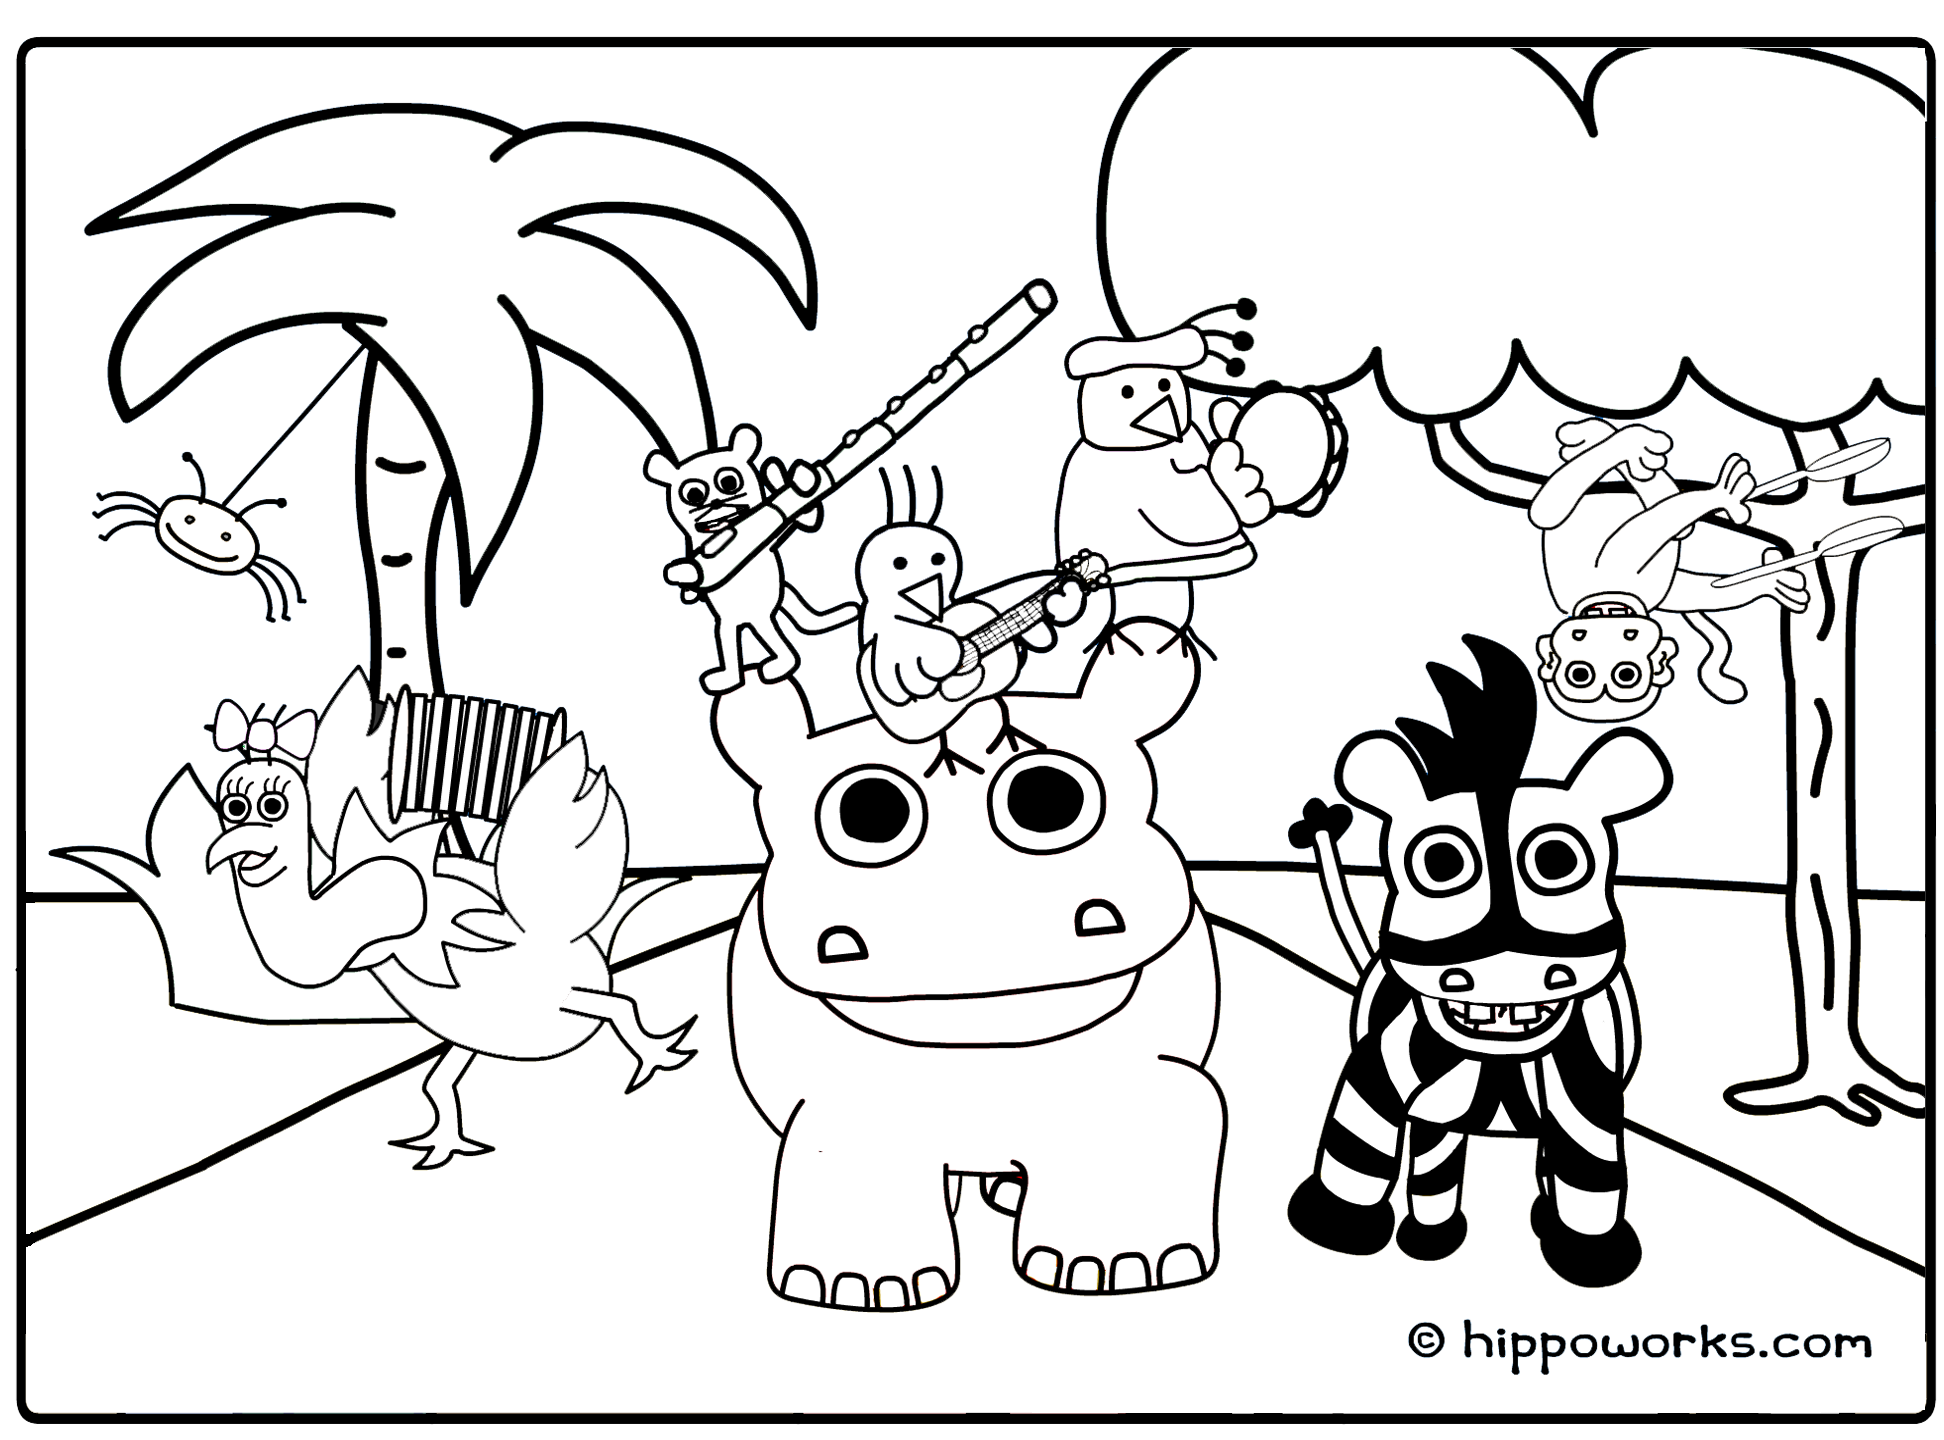 Coloring Pages Jungle Printable - Colorine.net | #14731